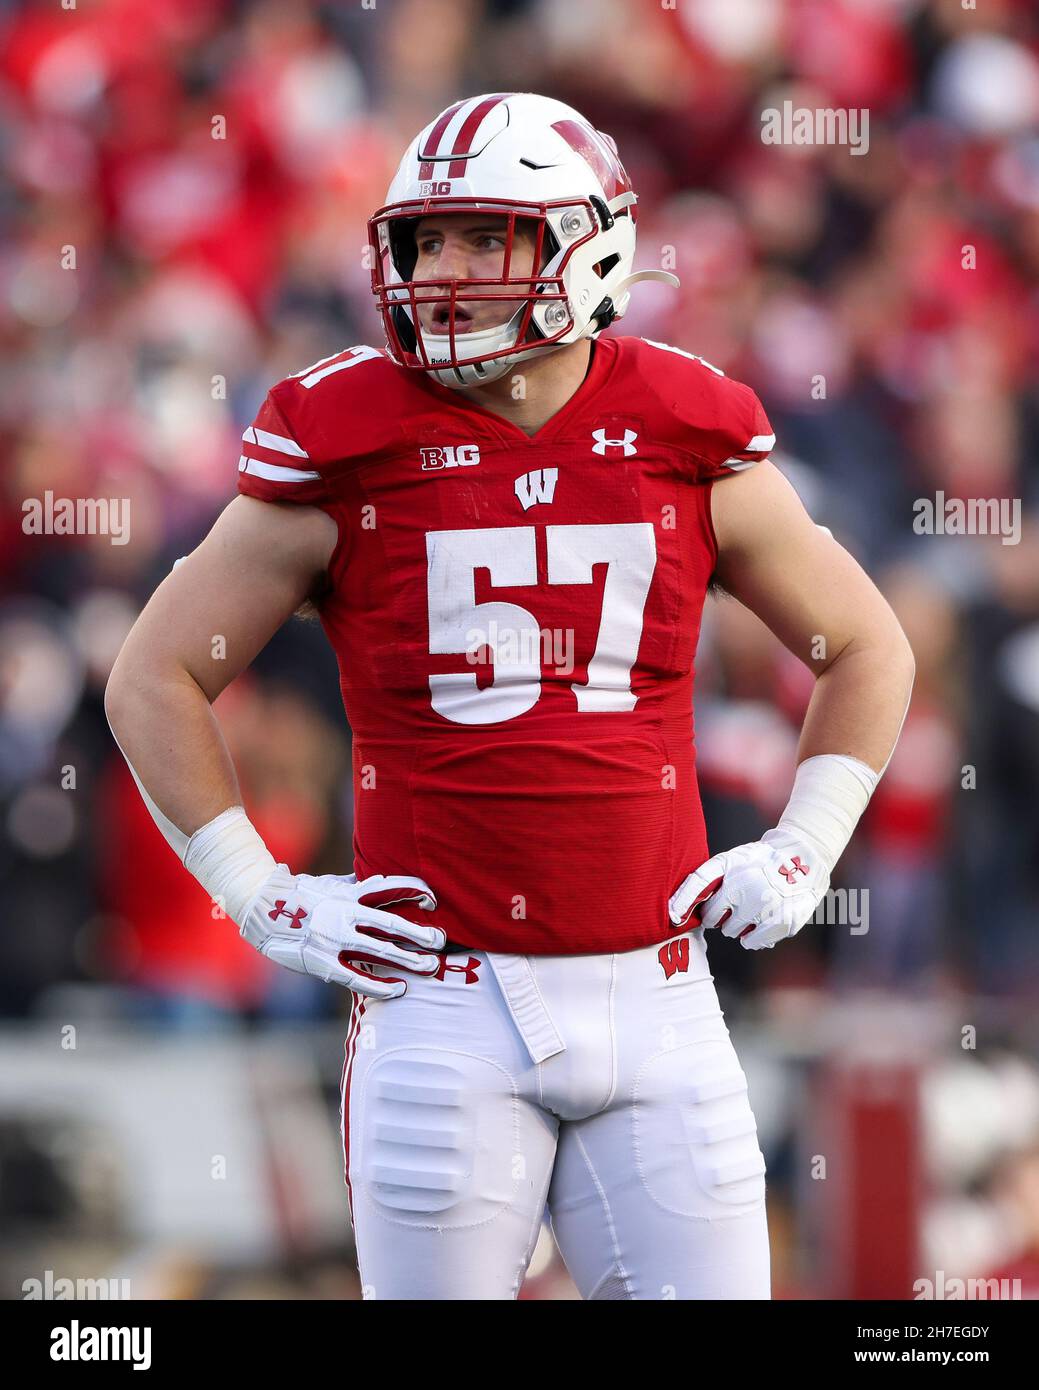 Madison, WI, USA. 20th Nov, 2021. Wisconsin Badgers linebacker Jack Sanborn (57) during the NCAA Football game between the Nebraska Cornhuskers and the Wisconsin Badgers at Camp Randall Stadium in Madison, WI. Darren Lee/CSM/Alamy Live News Stock Photo